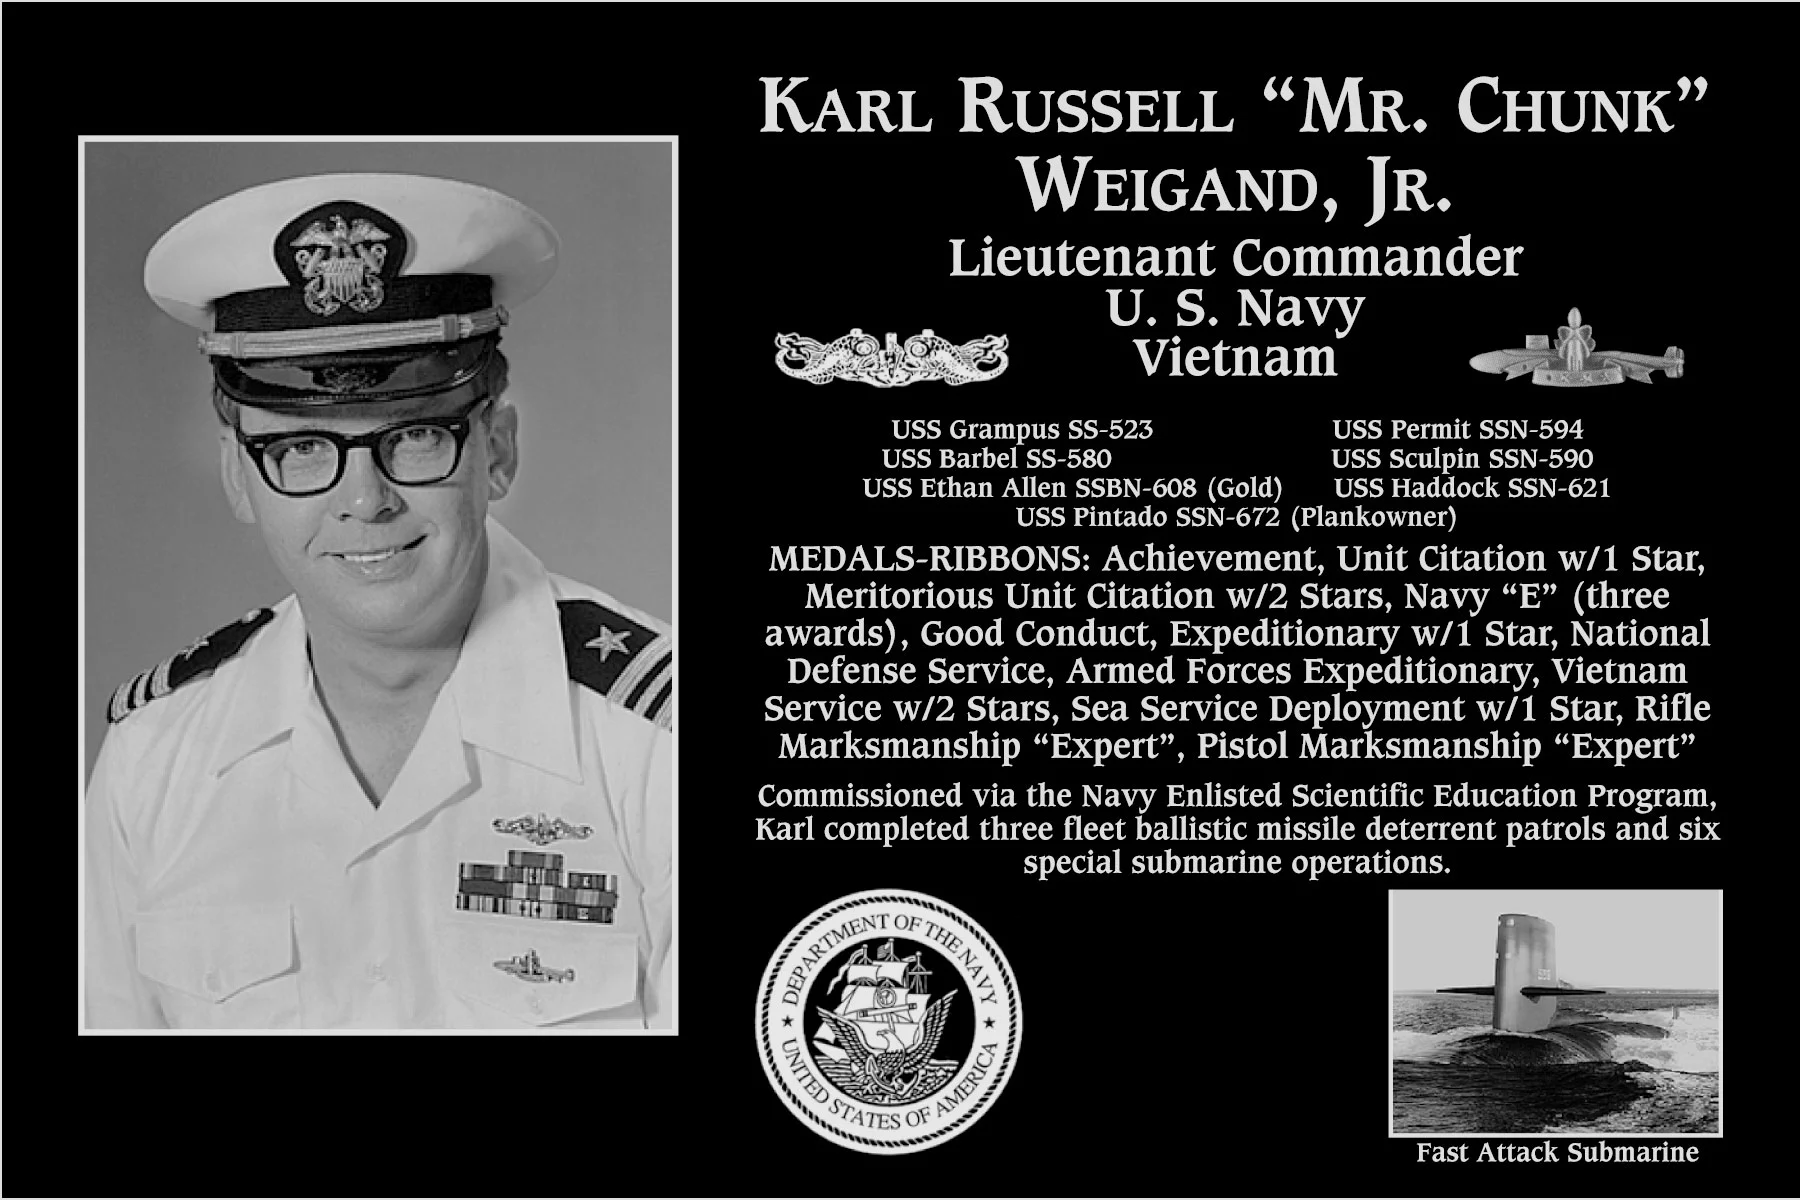 Karl Russell “Mr. Chunk” Weigand, jr